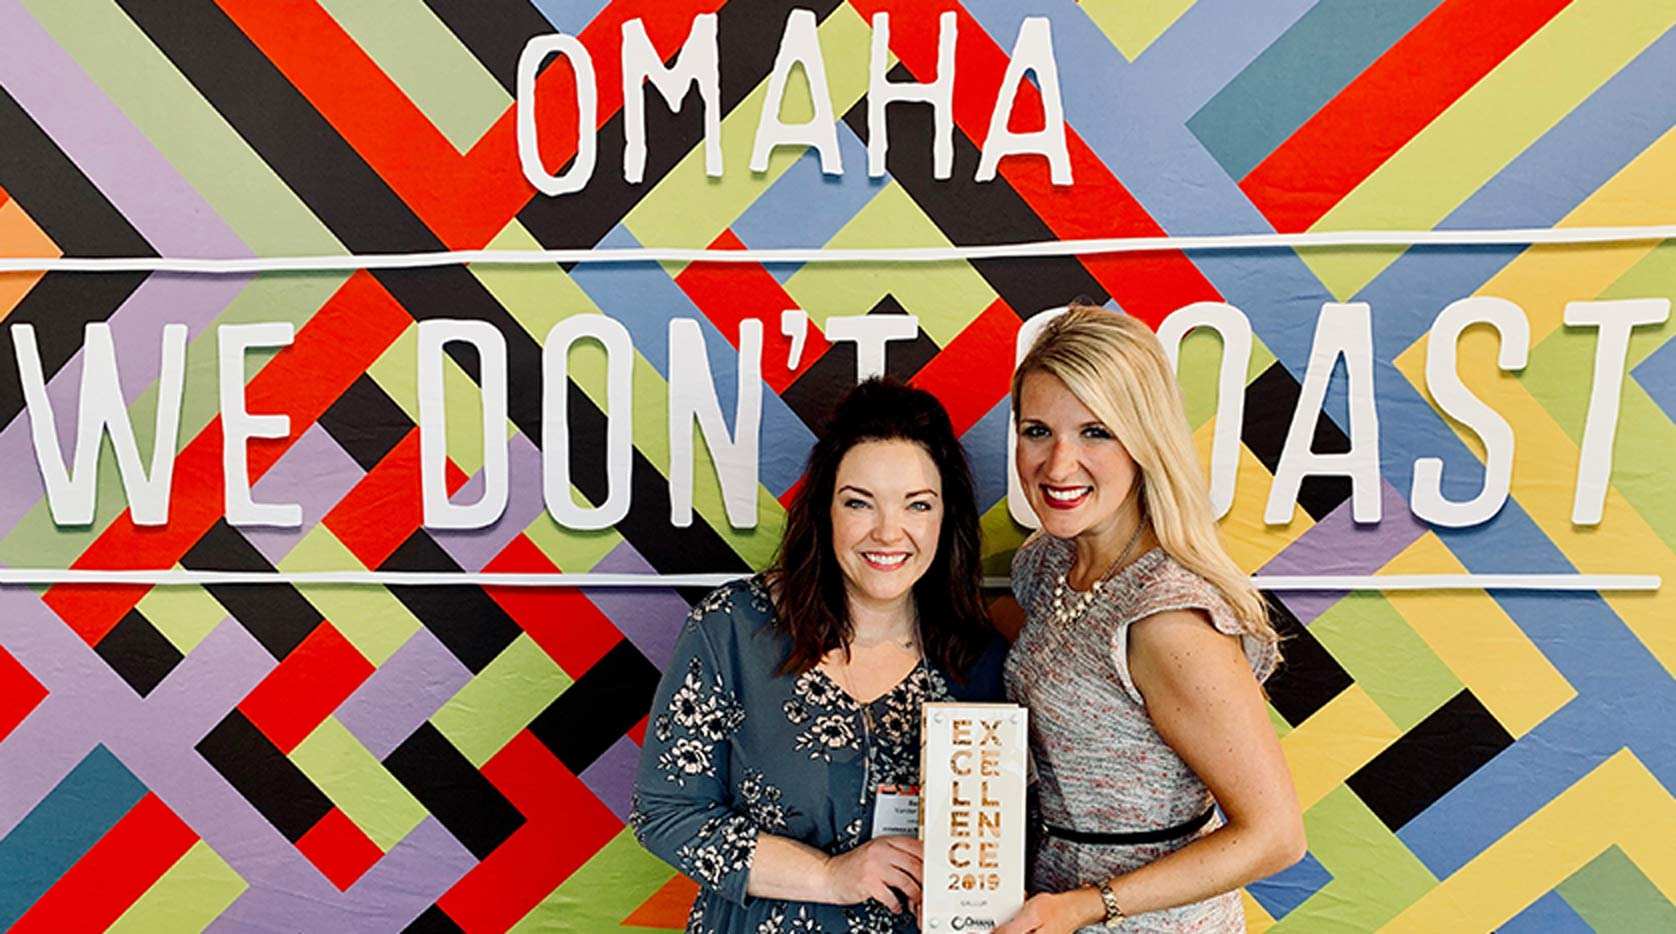 Two employees showing off an Excellence 2019 program in front of a sign saying 'Omaha We don't Coast'